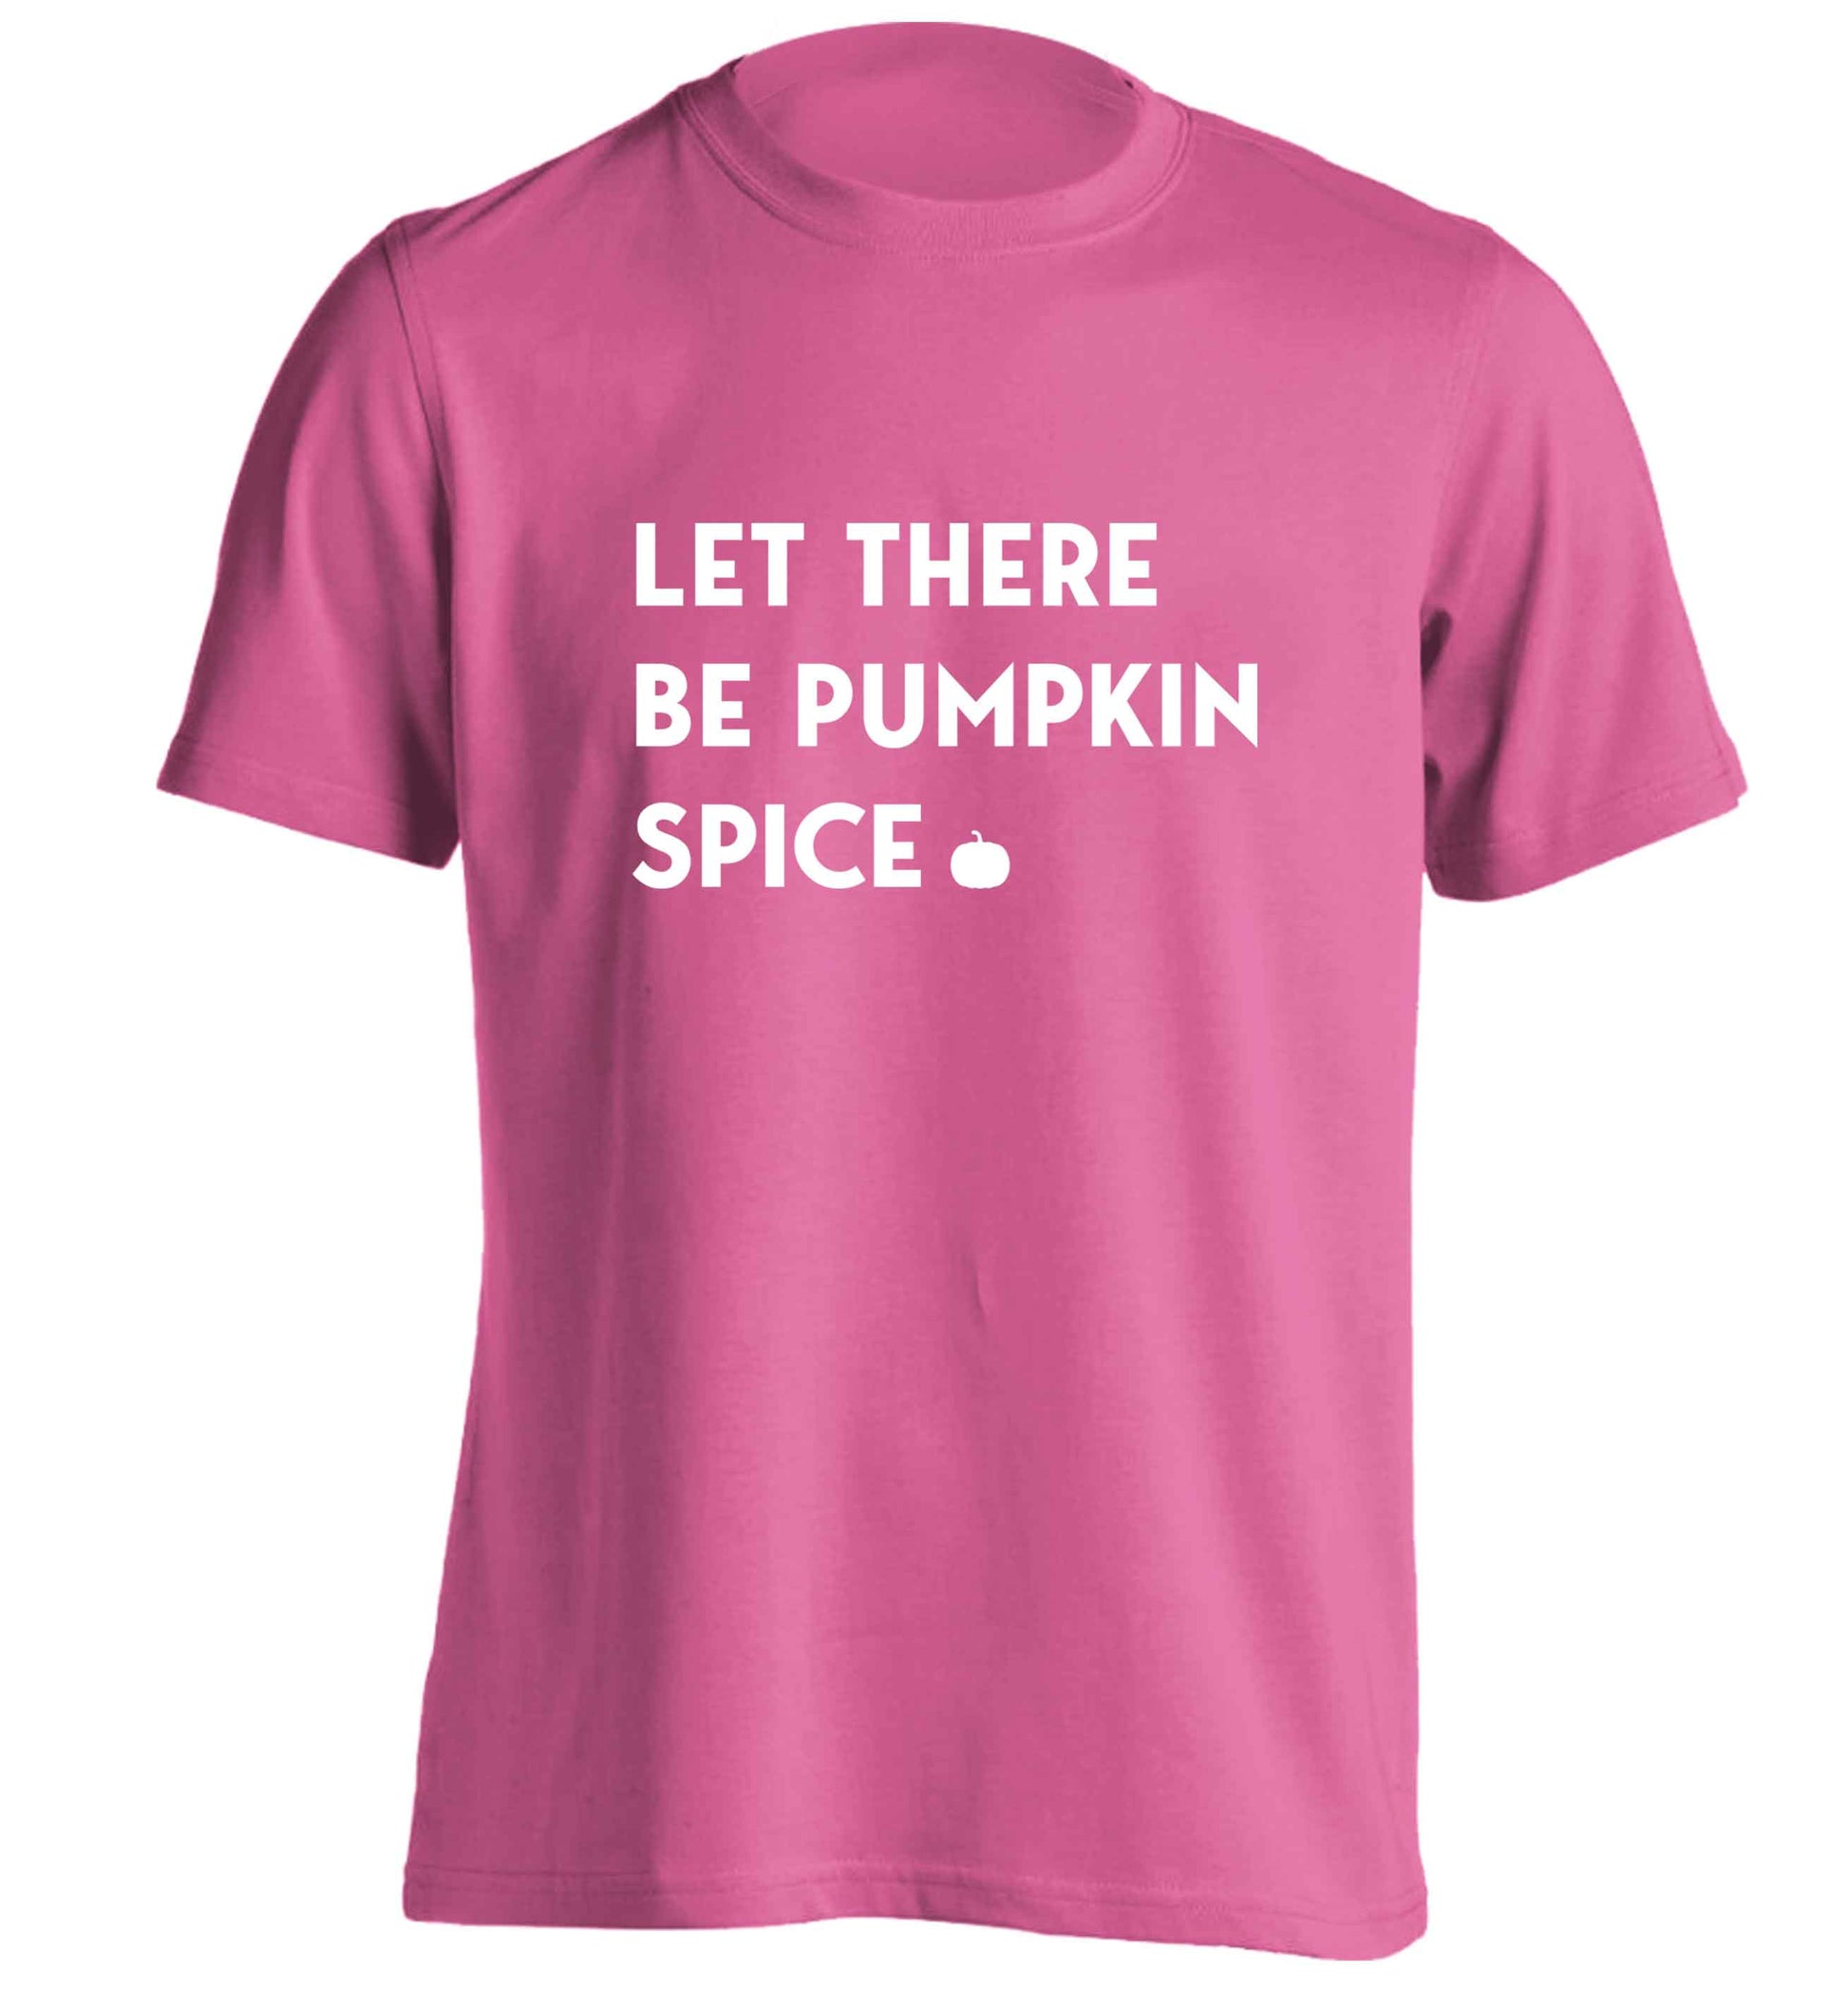 Let Be Pumpkin Spice adults unisex pink Tshirt 2XL